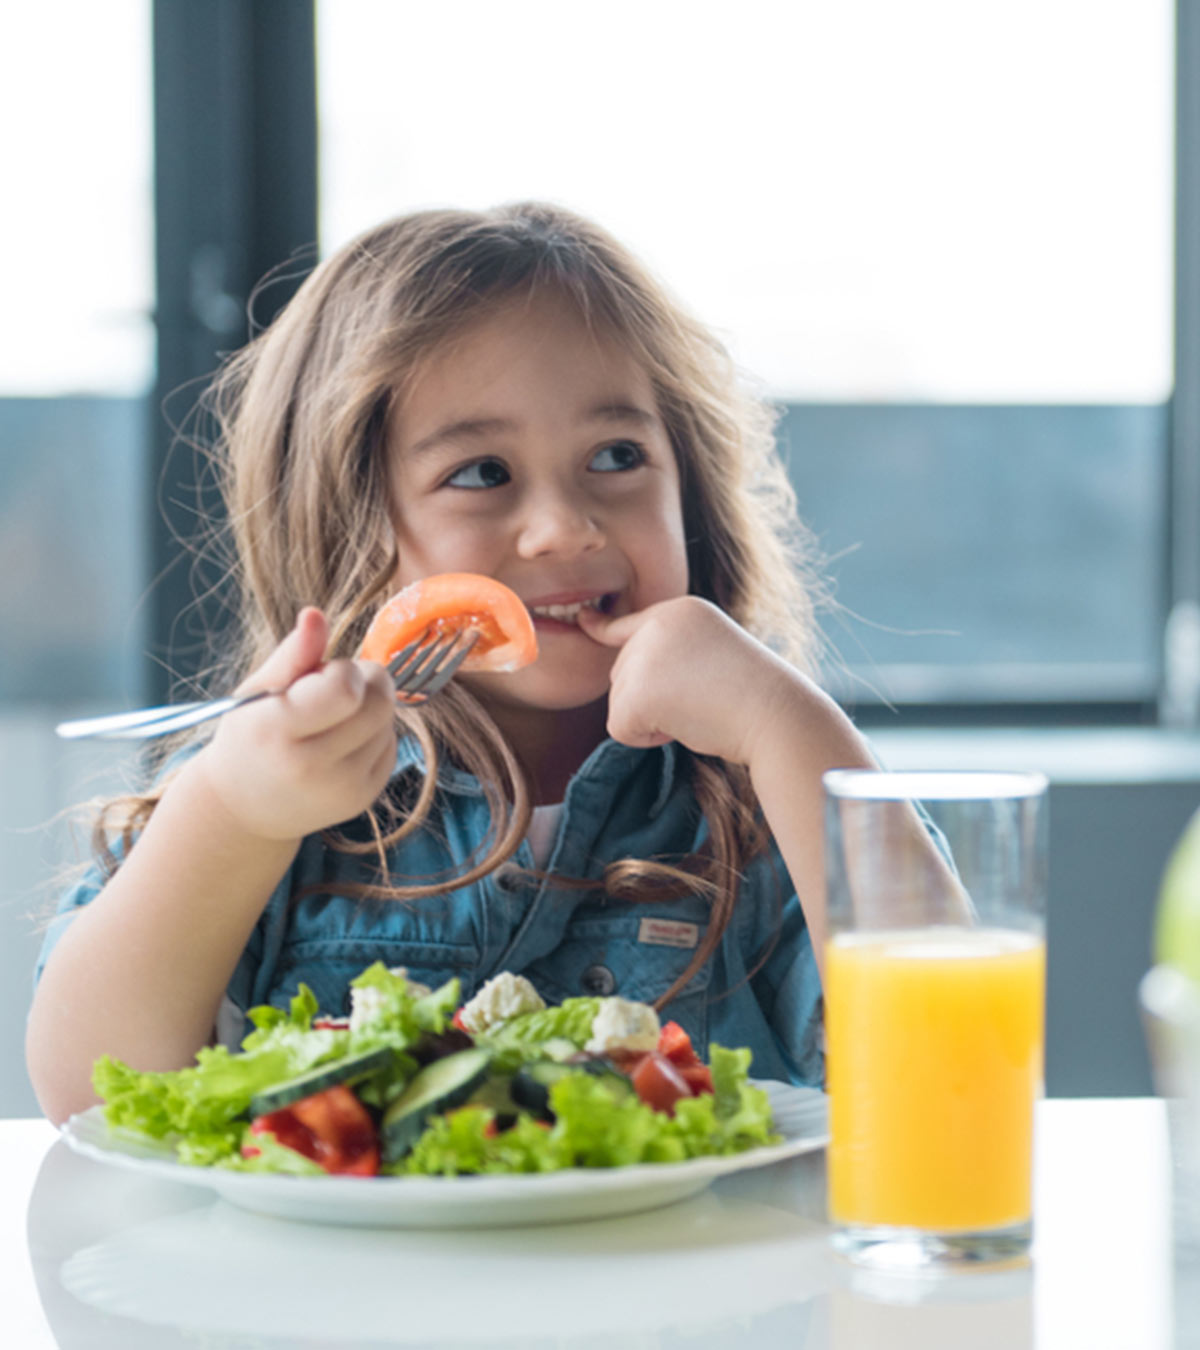 Top 21 Healthy Foods For Kids And Tips To Make Them Eat